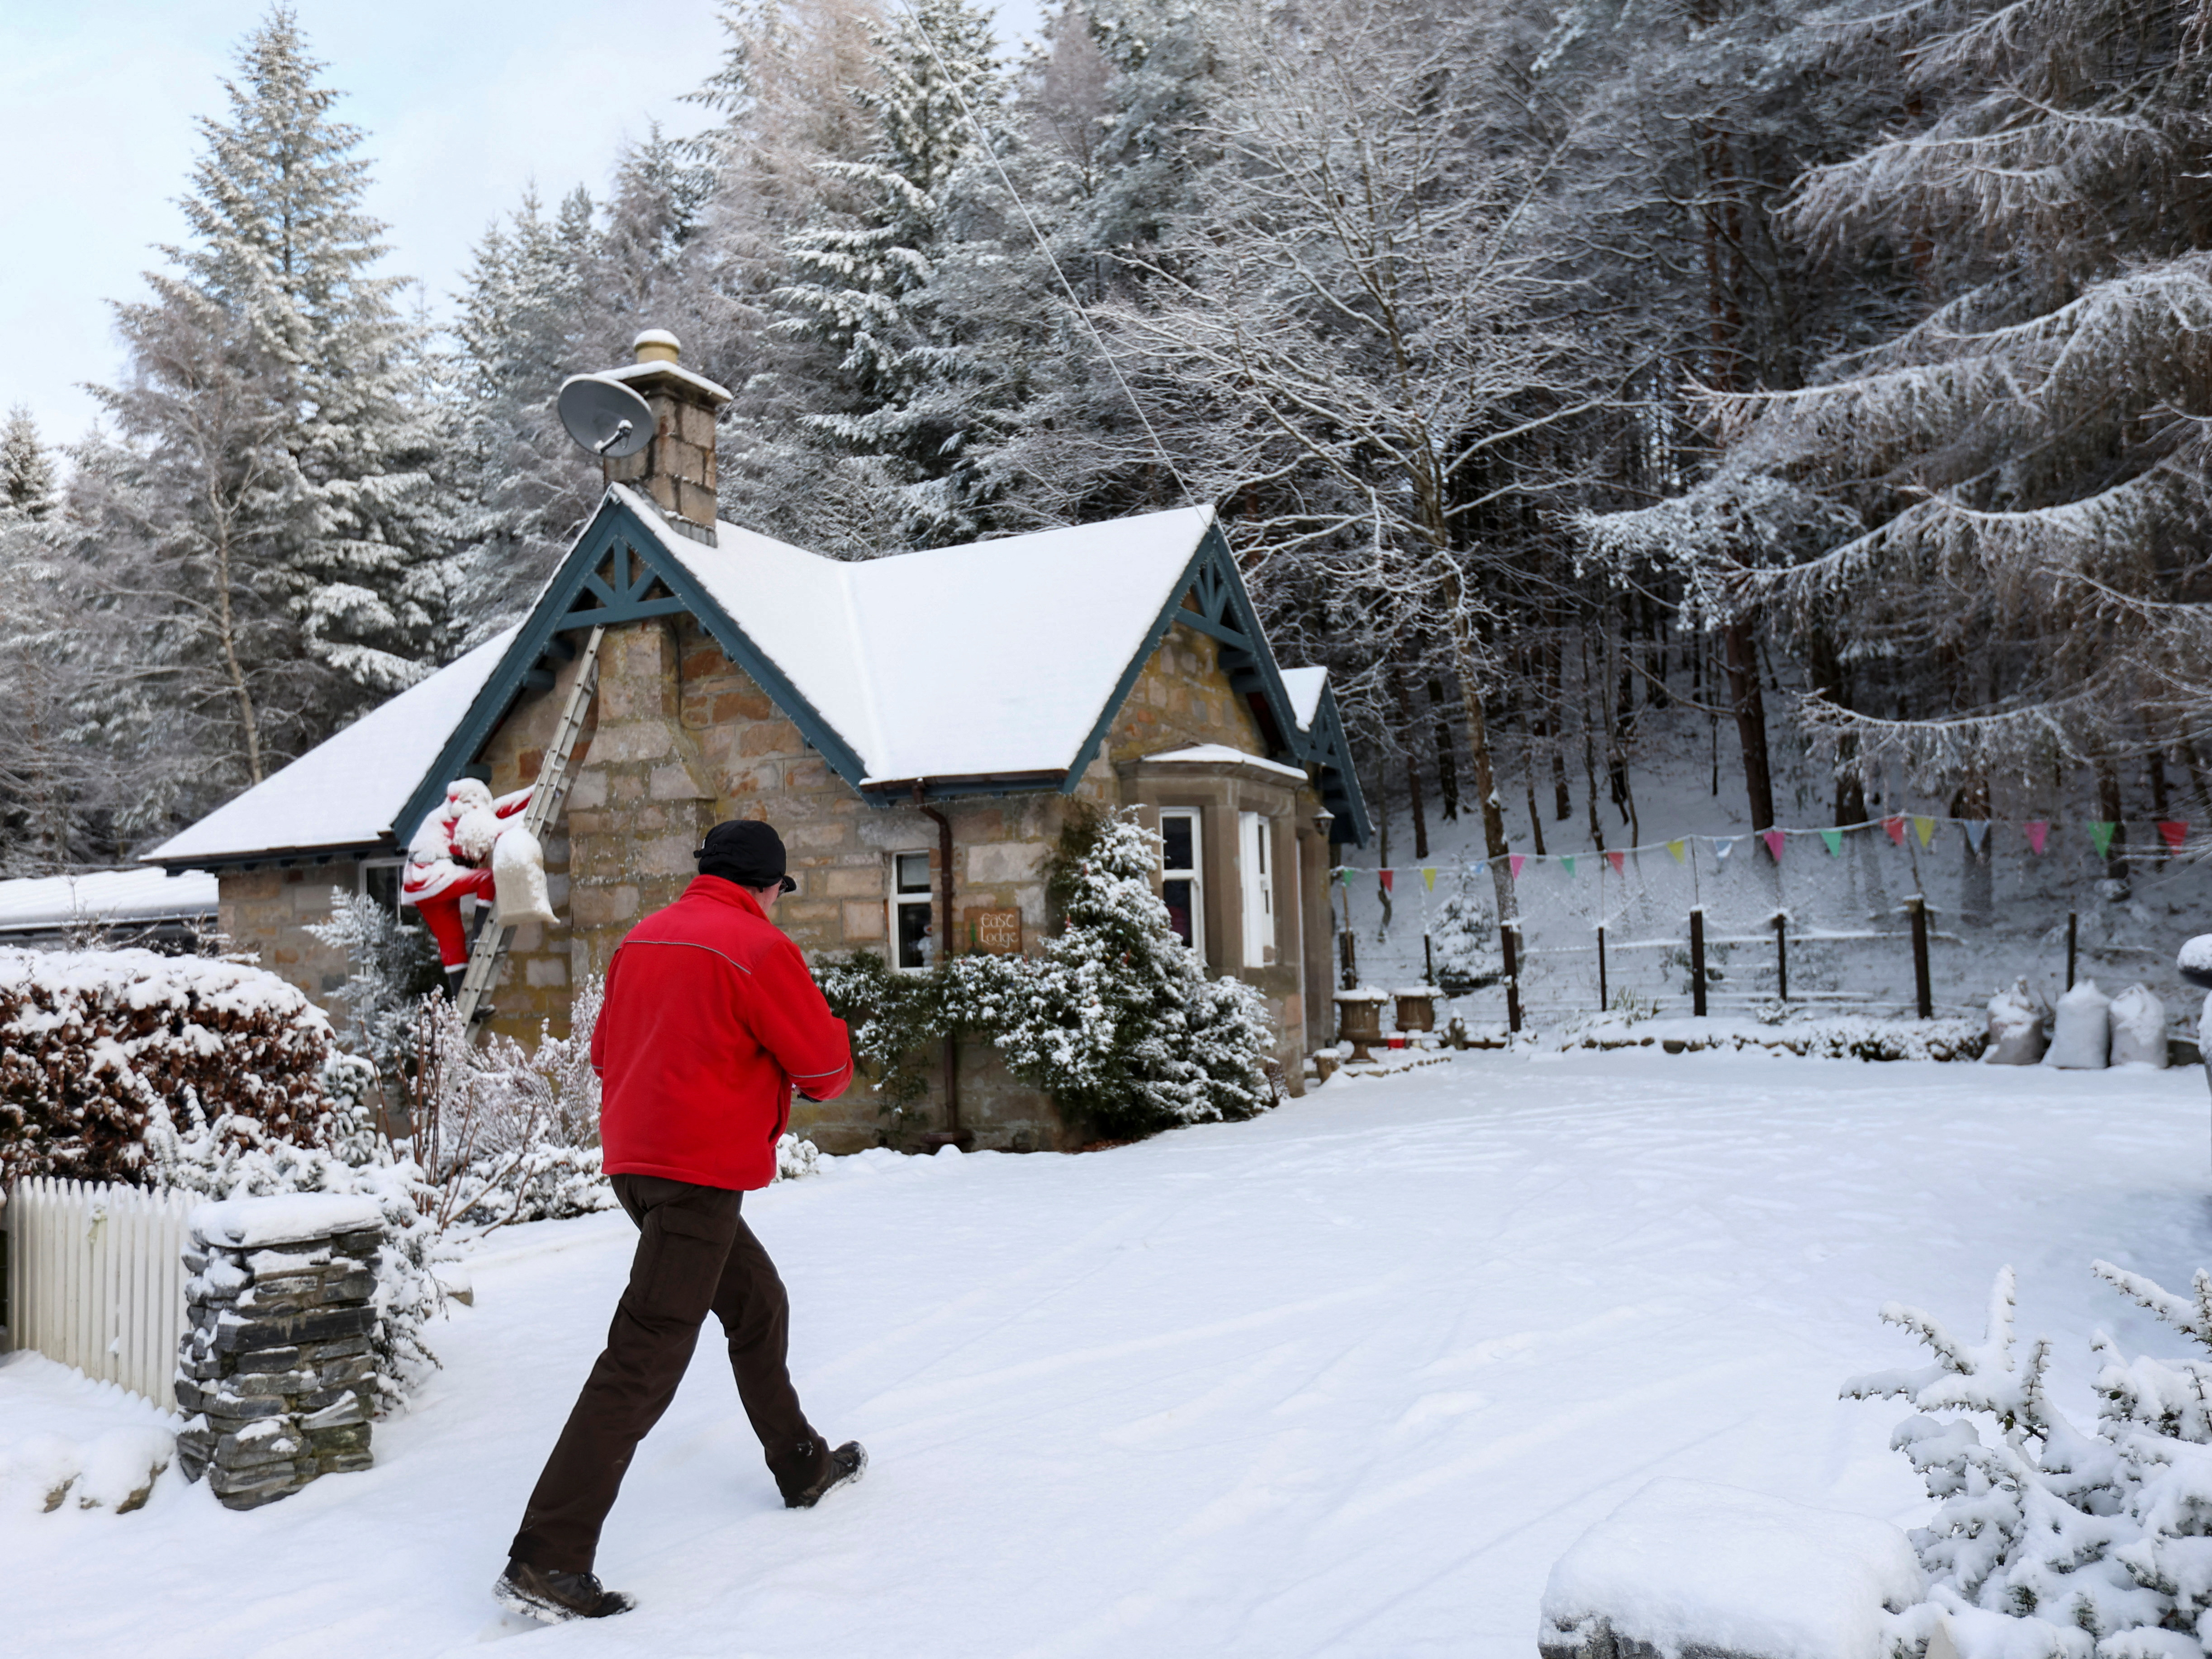 Royal Mail postman makes a delivery in Pitlochry, Scotland